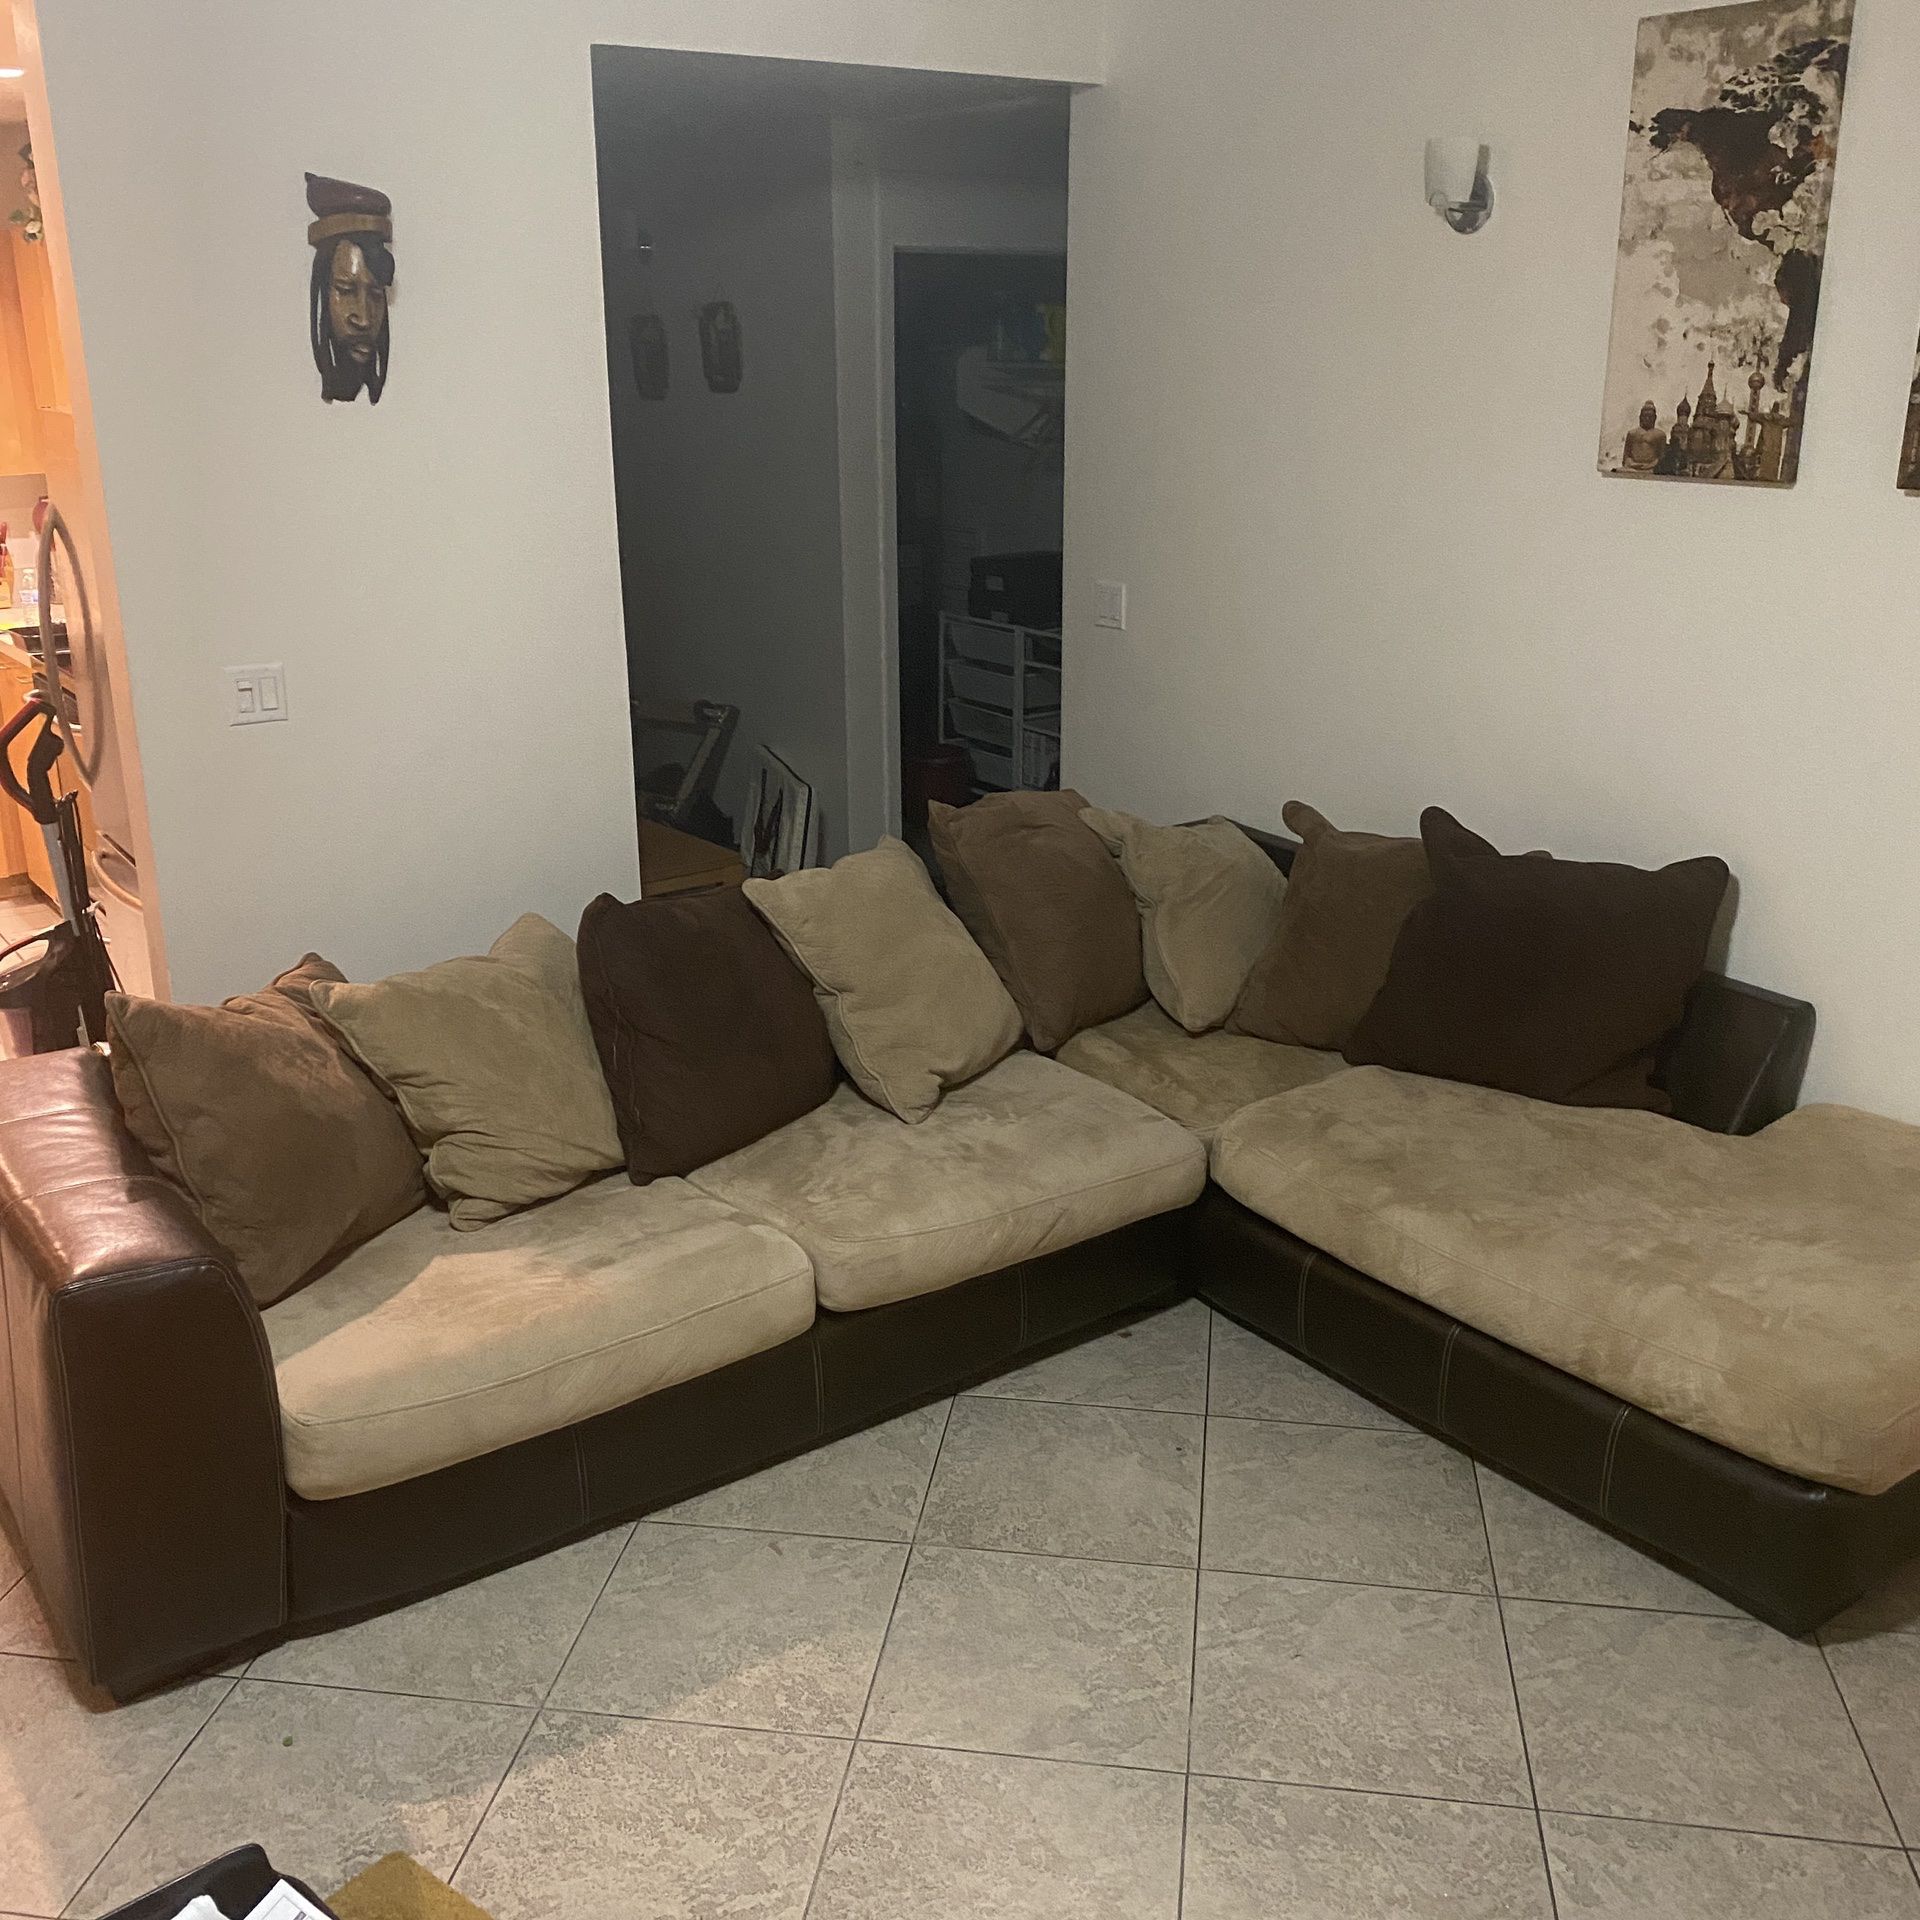 MUST SELL THIS WEEKEND 2 Piece Sectional, Large Size, Ashley Furniture